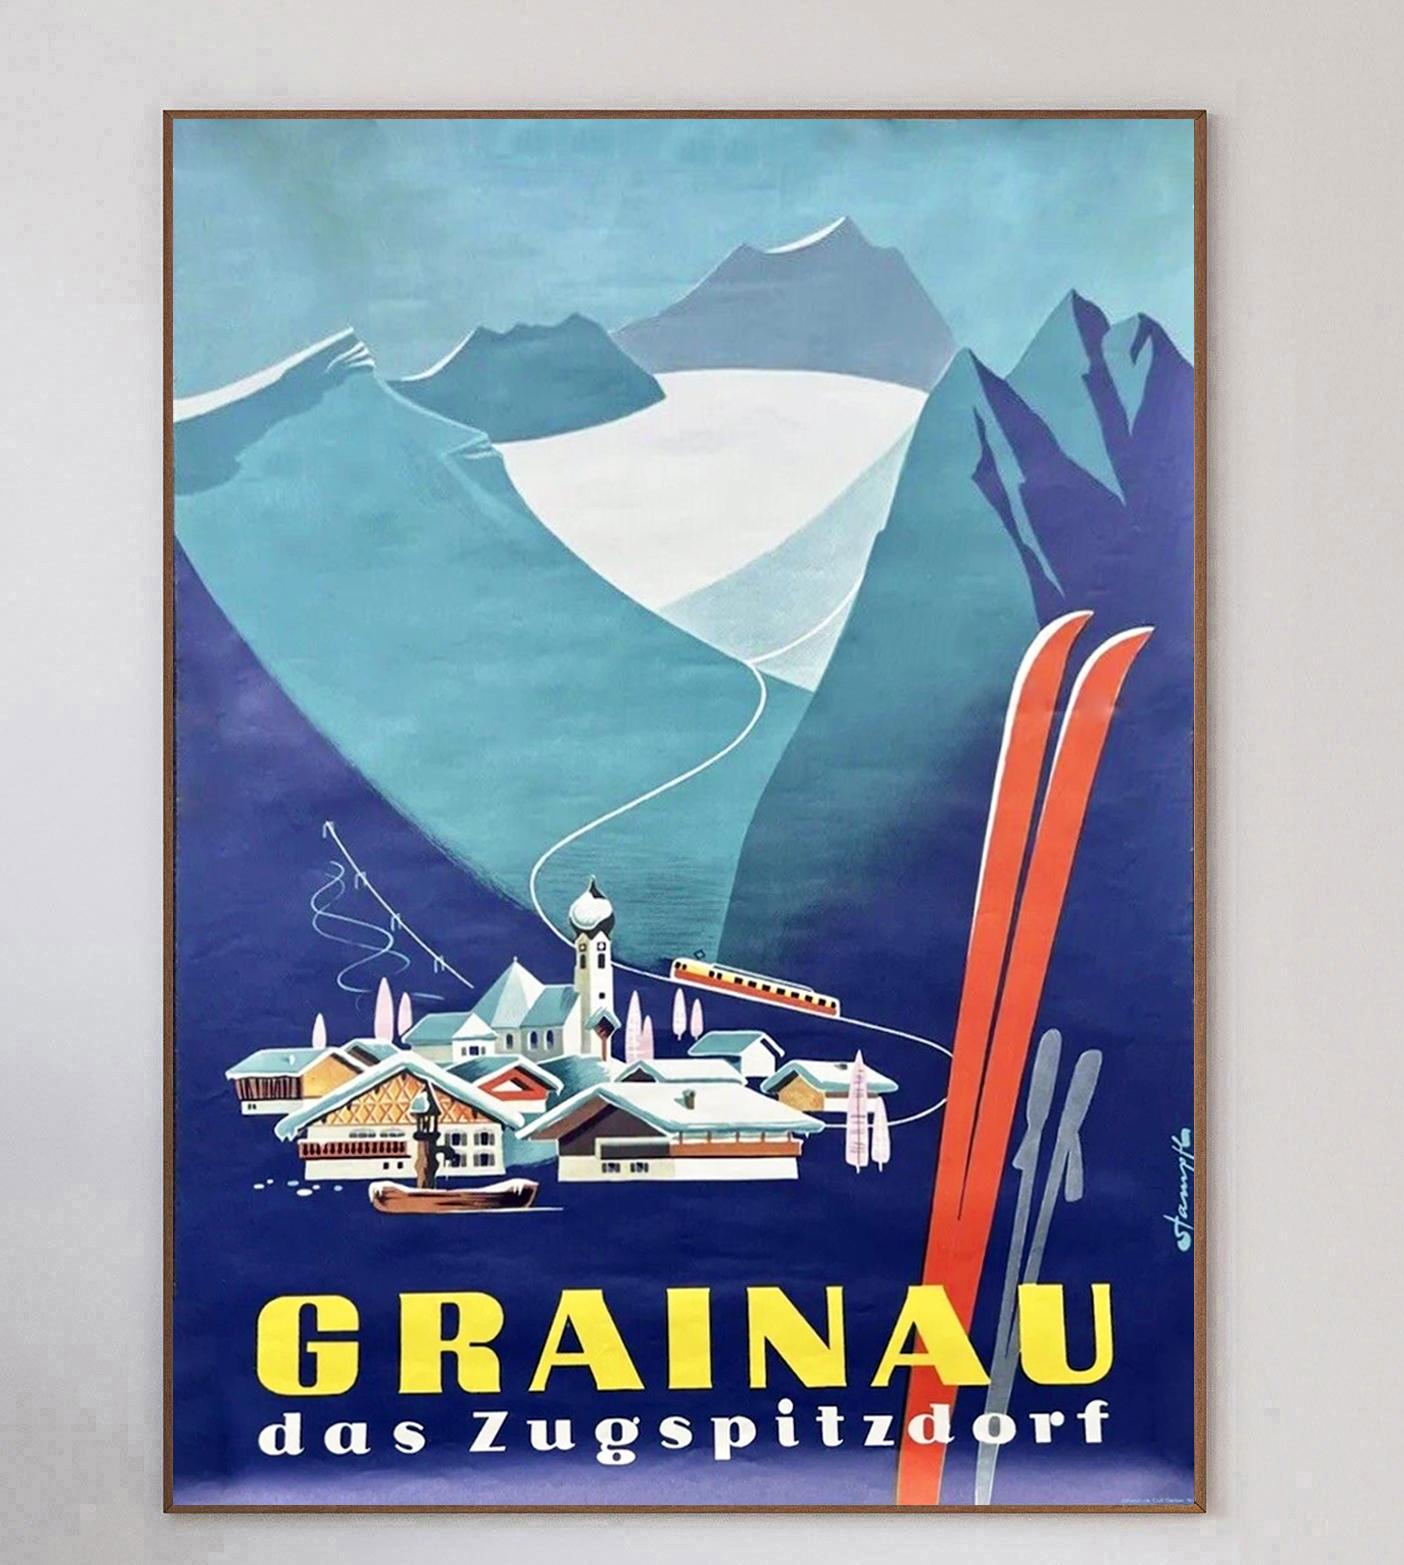 Beautiful vibrant poster from 1957 promoting the ski resort of Grainau in Bavaria in Germany. Sat at the foot of the Zugspitze mountain, it is known as 